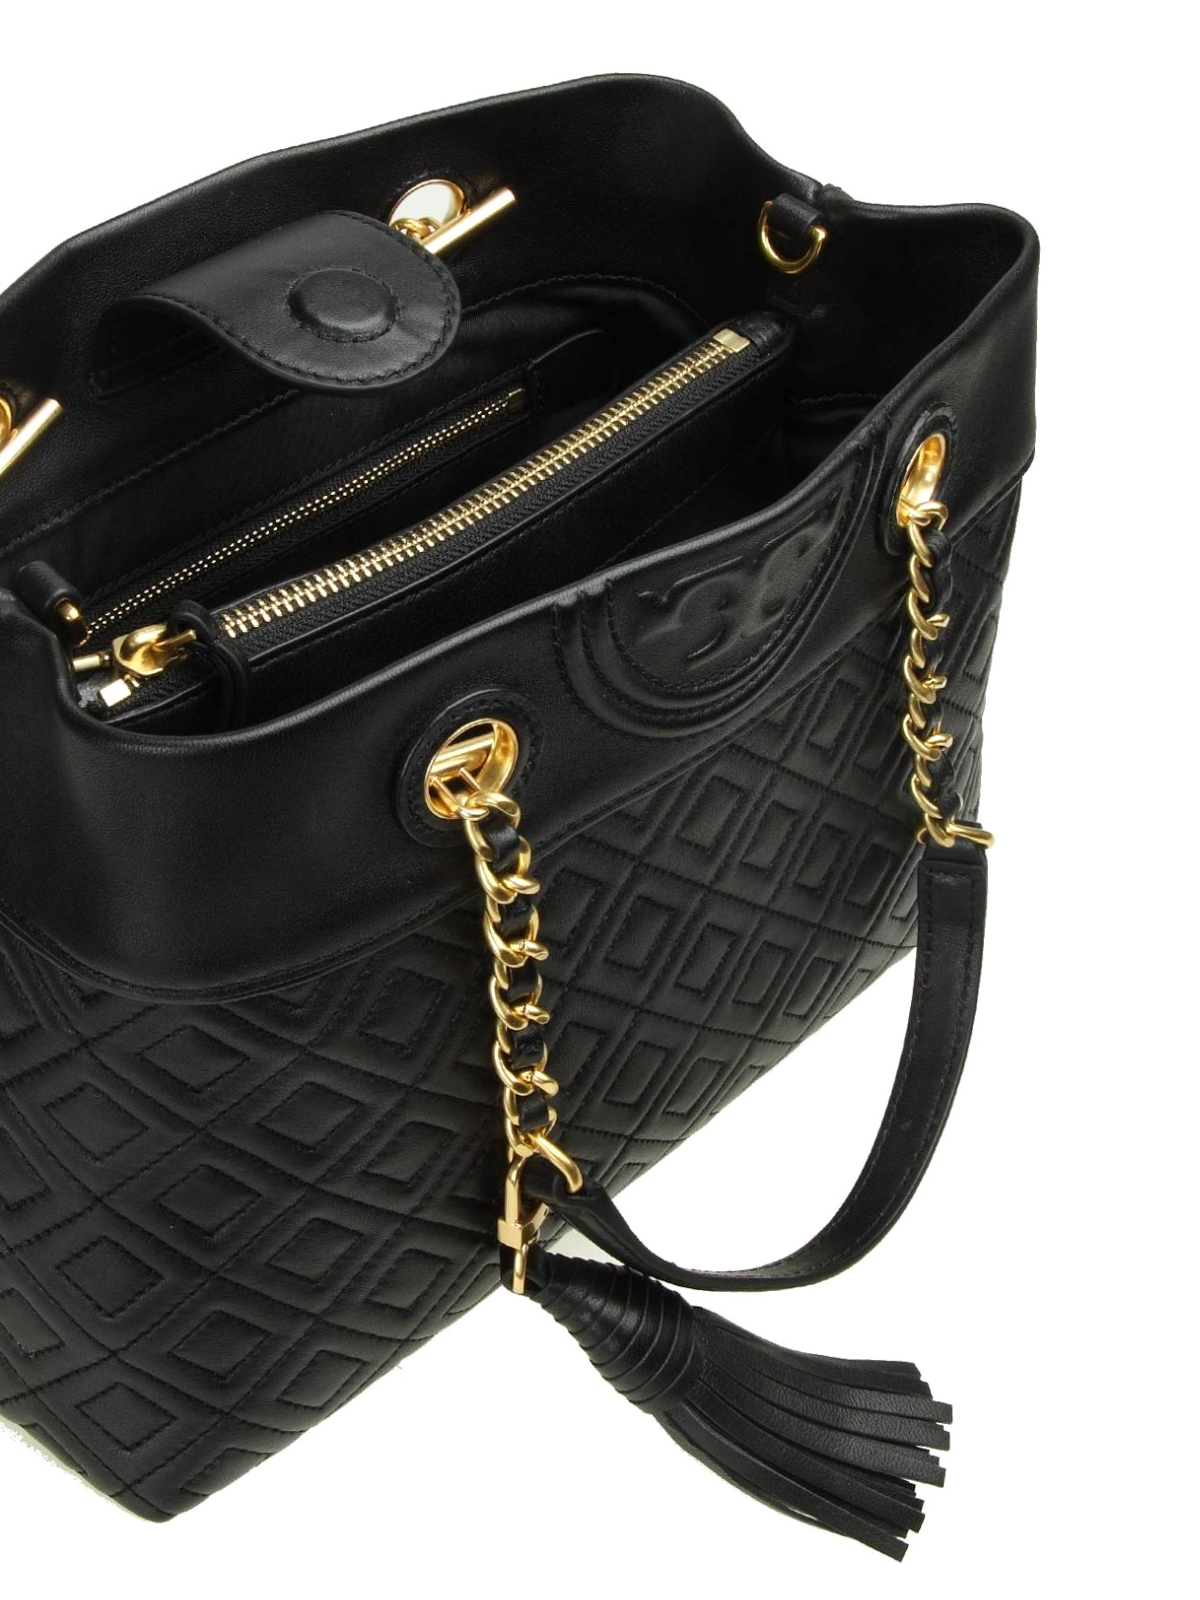 Tory Burch Fleming Small black leather shoulder bag